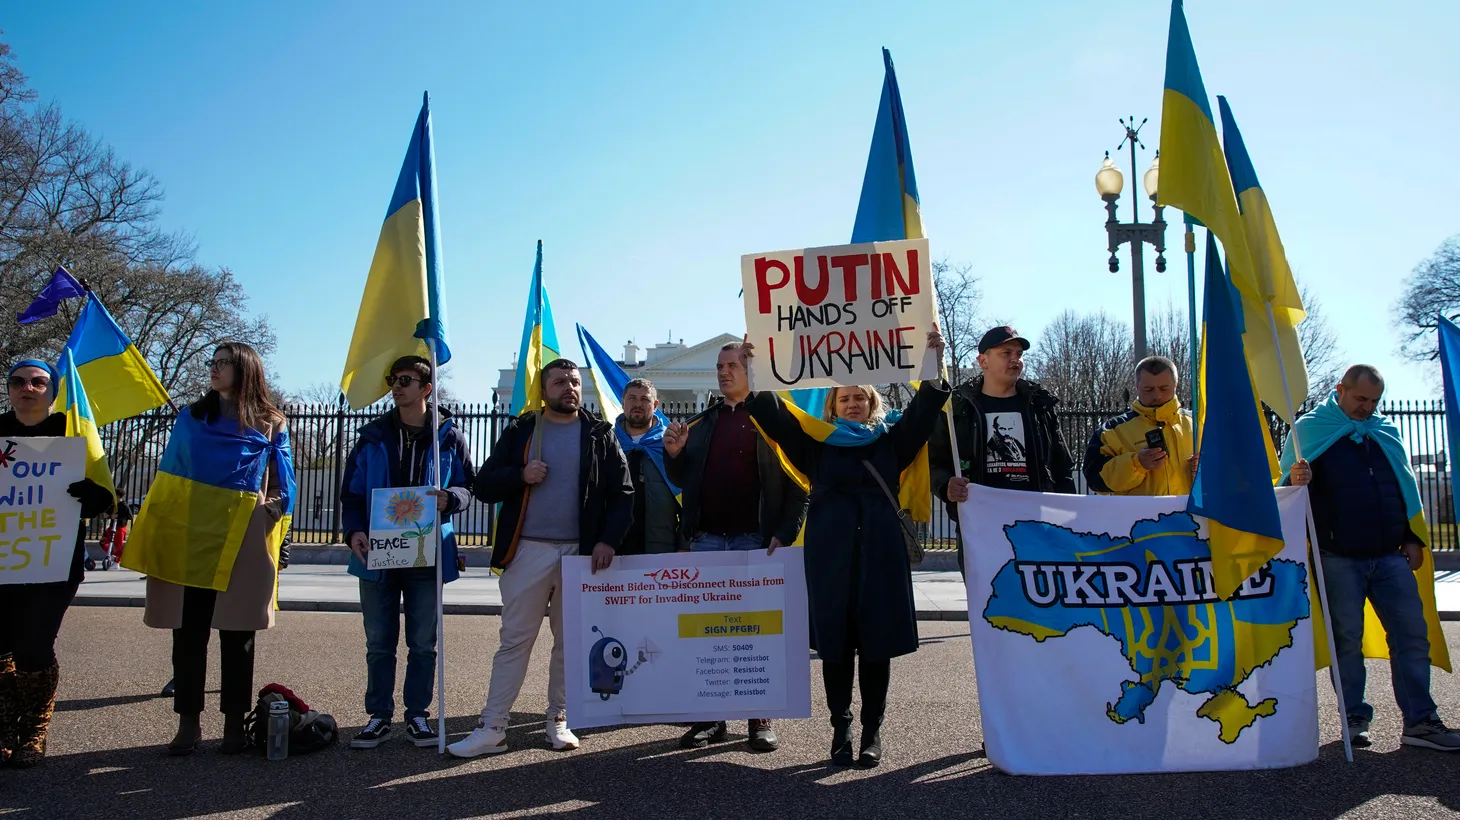 Demonstrators hold Ukrainian flags, signs and banners during a "Stand with Ukraine" rally against the Russian invasion of Ukraine, in front of the White House in Washington, U.S., February 28, 2022.